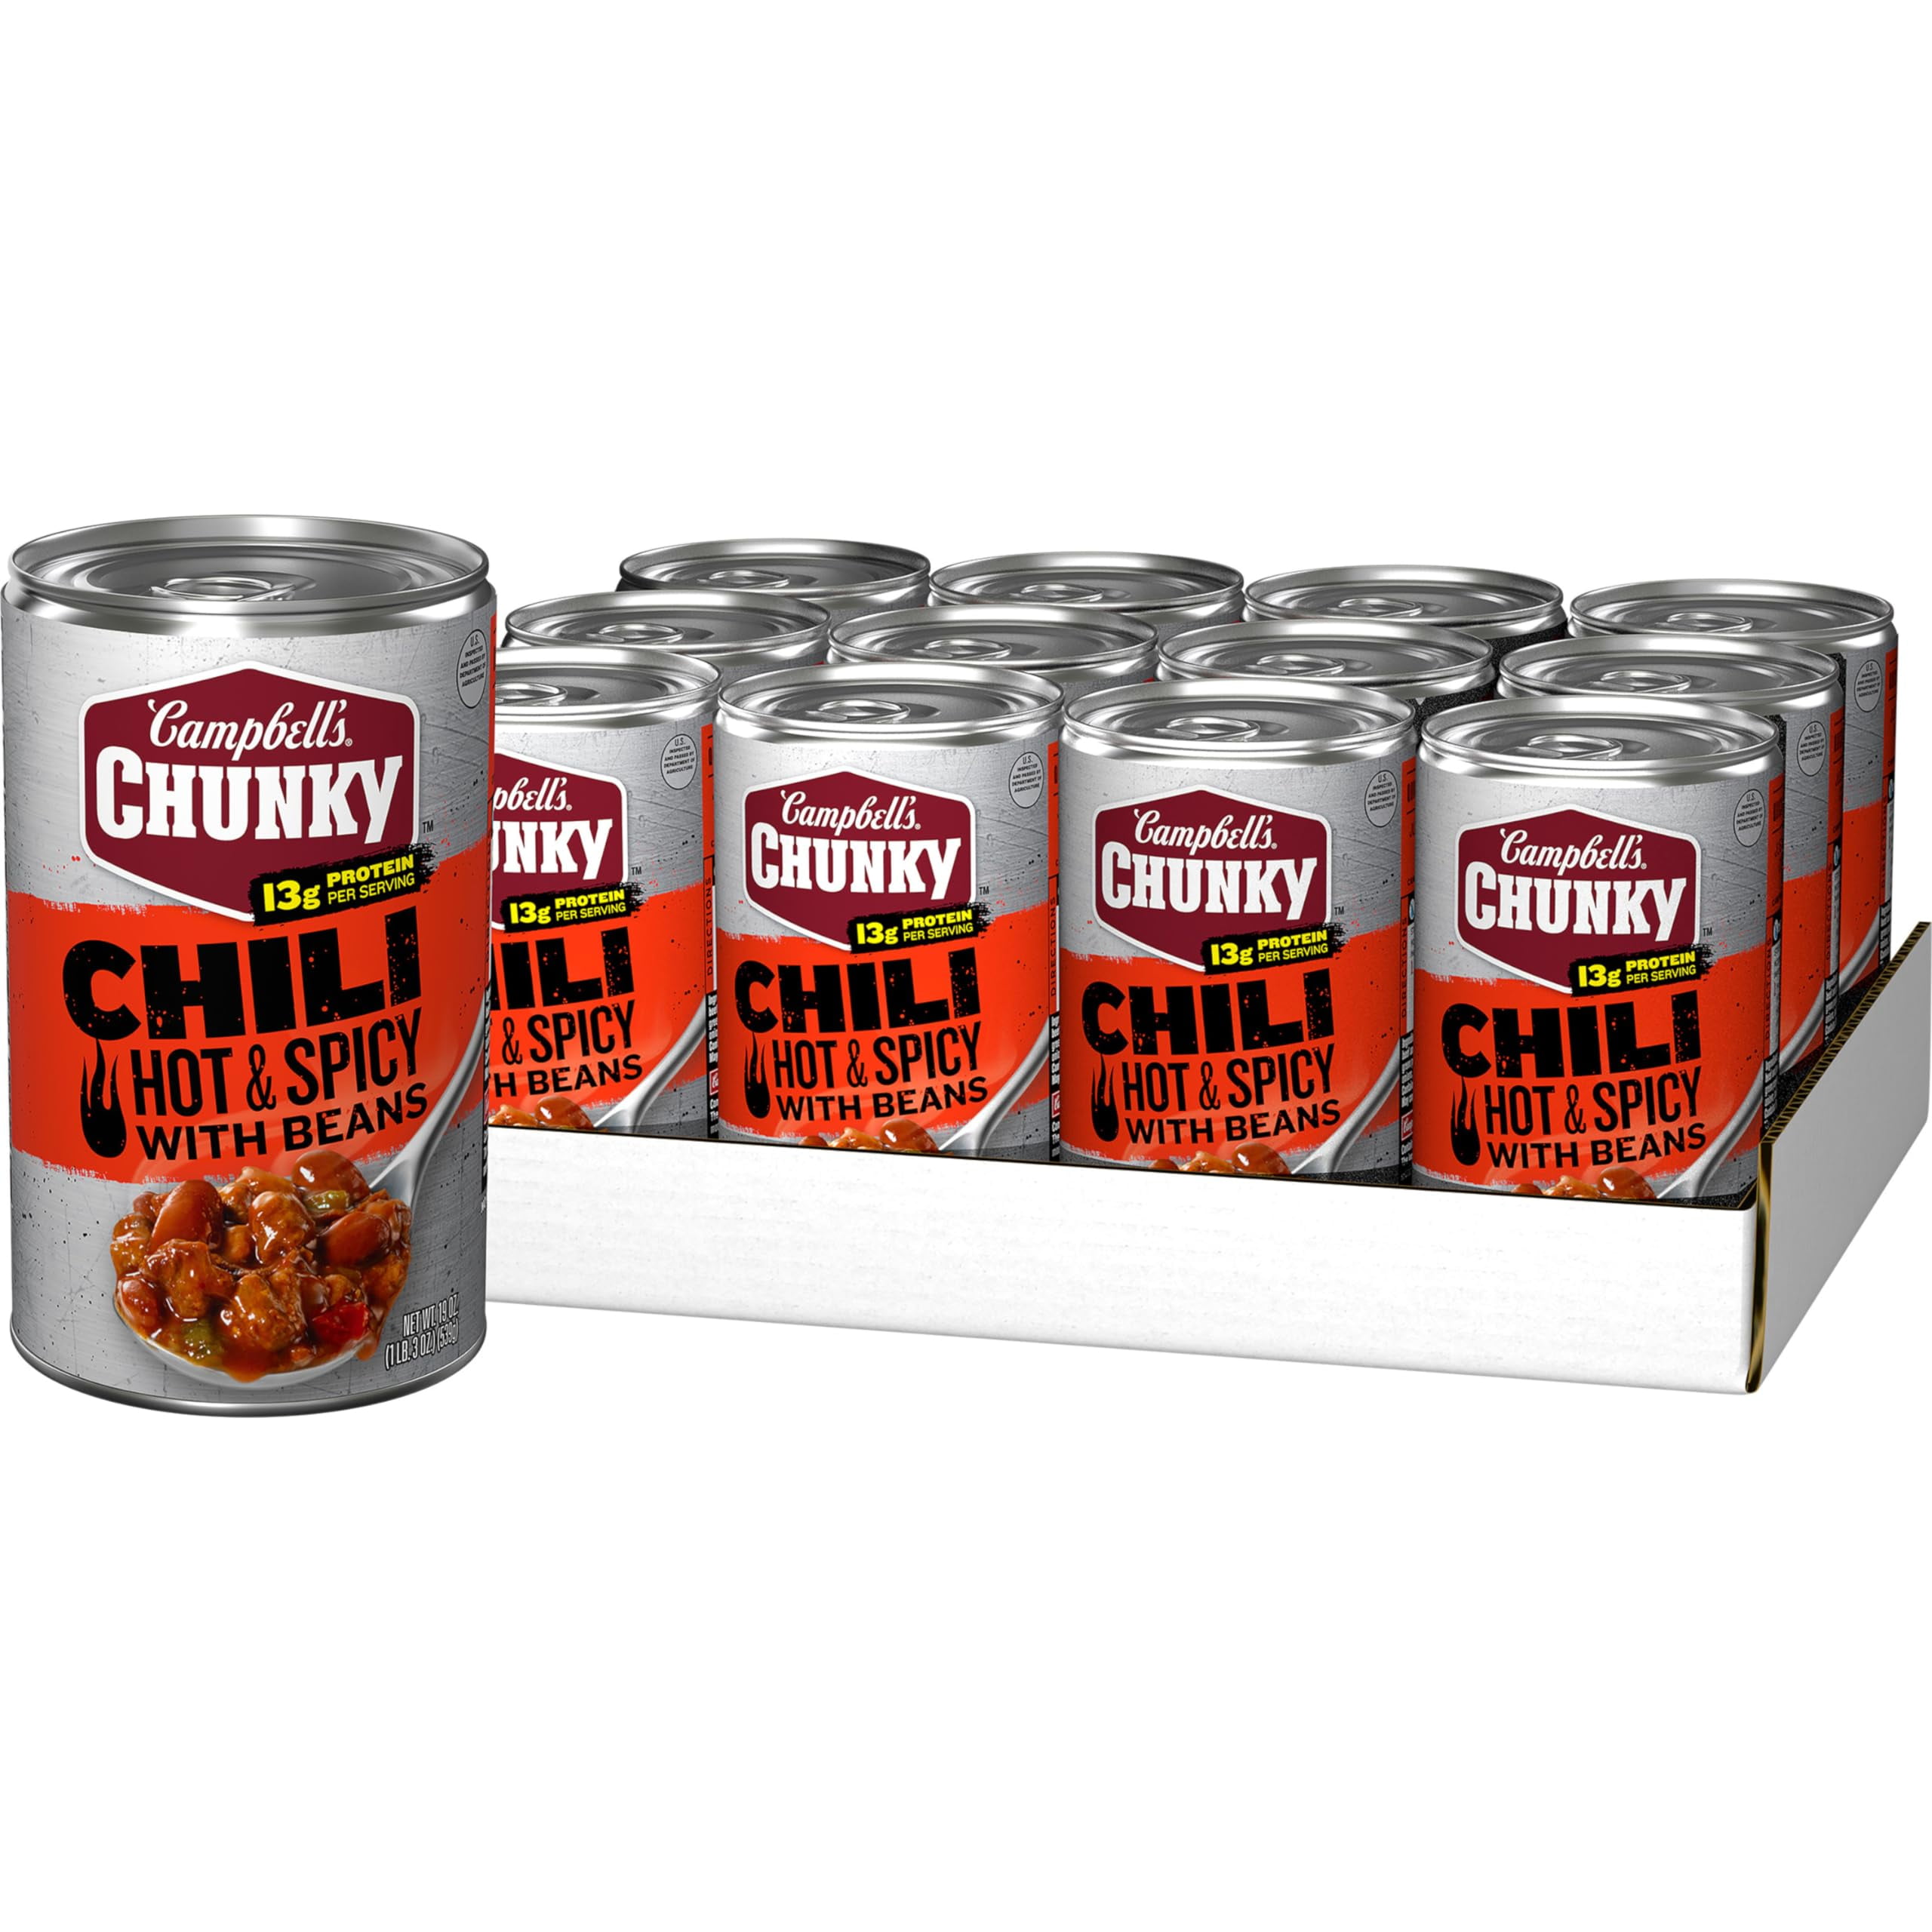 Campbells Chunky Chili Hot Ci30 And Spicy Beef And Bean 19 Oz Can Case